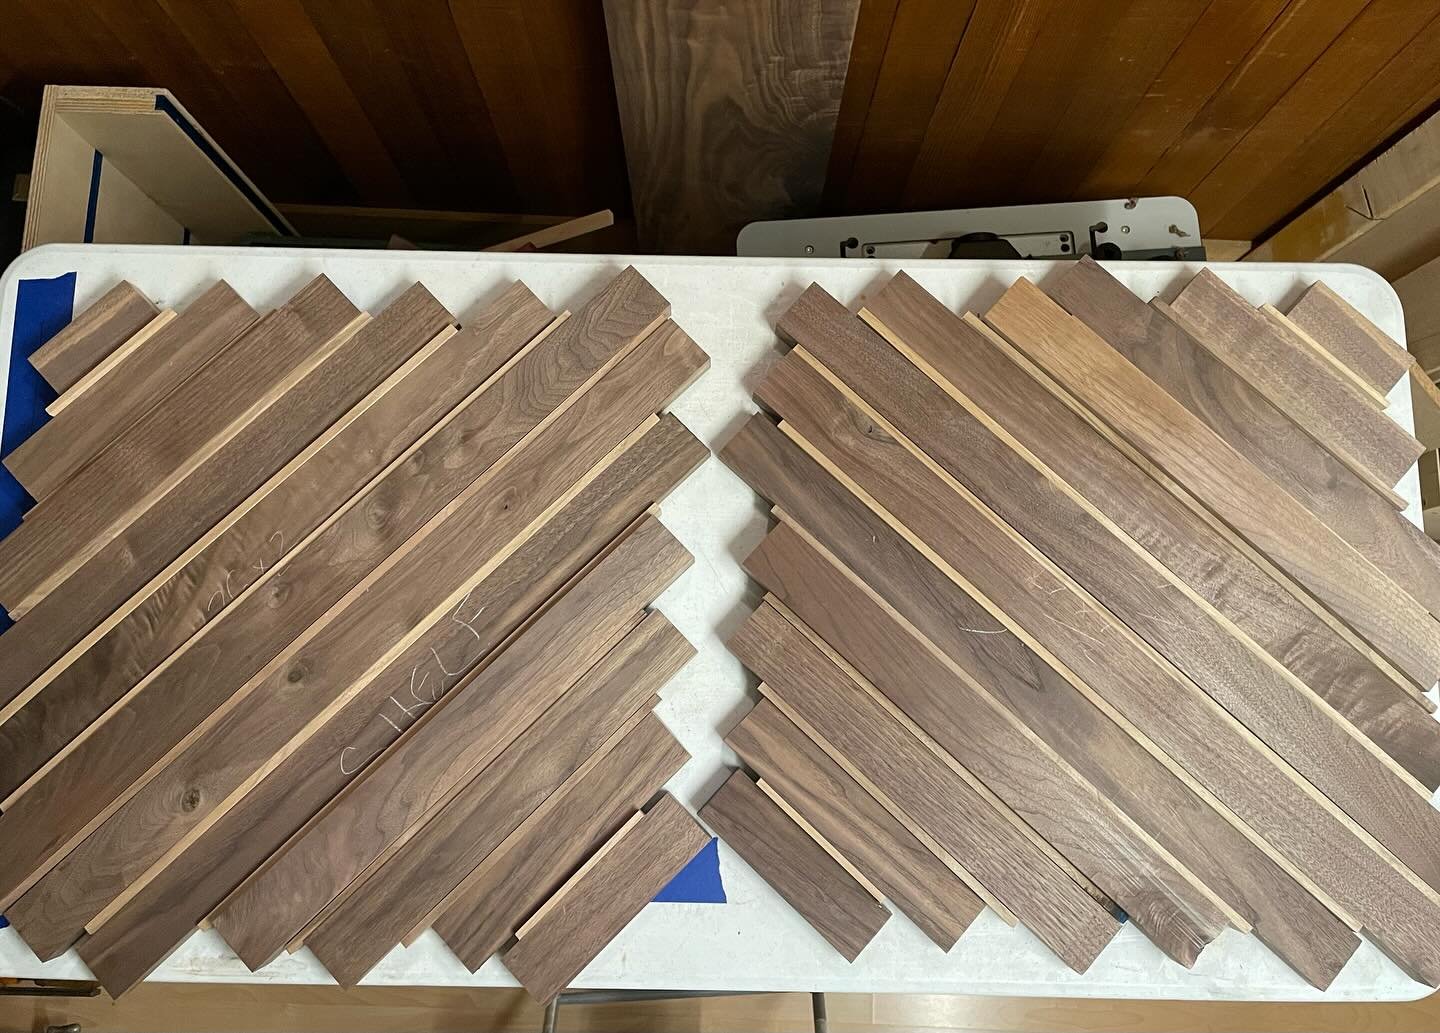 Doors for the credenza, mixing walnut heartwood with it&rsquo;s sapwood. It&rsquo;s crazy how one tree can have so much color variation. The doors unfortunately are not perfect squares so now just gotta figure out how the hell to glue this up properl